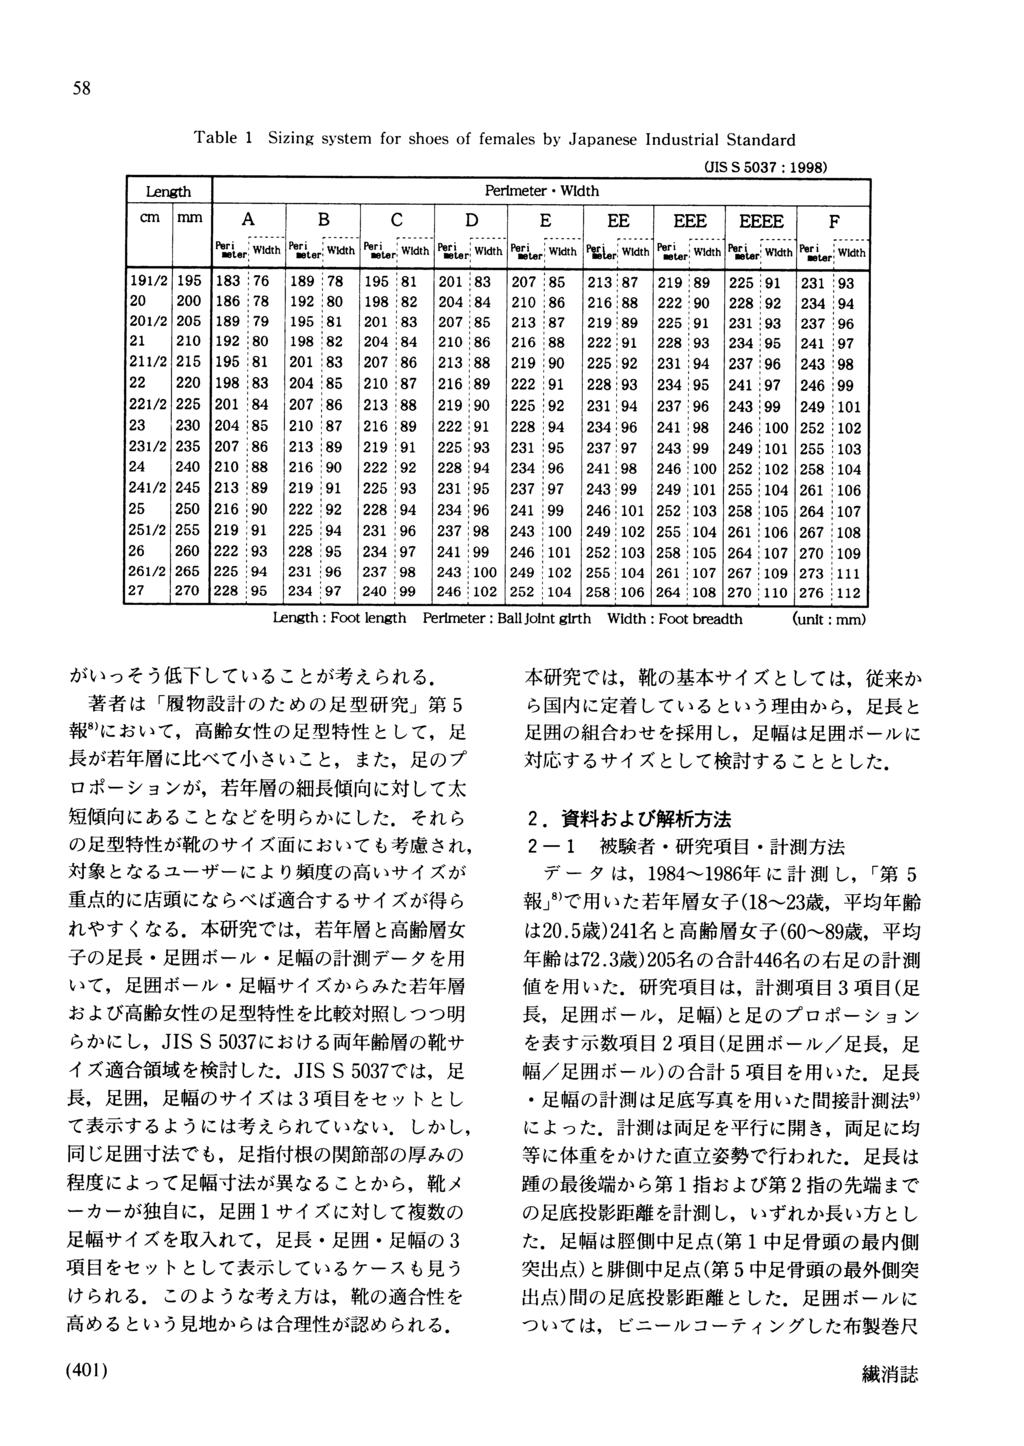 Table 1 Sizing system for shoes of females by Japanese Industrial Standard UIS S